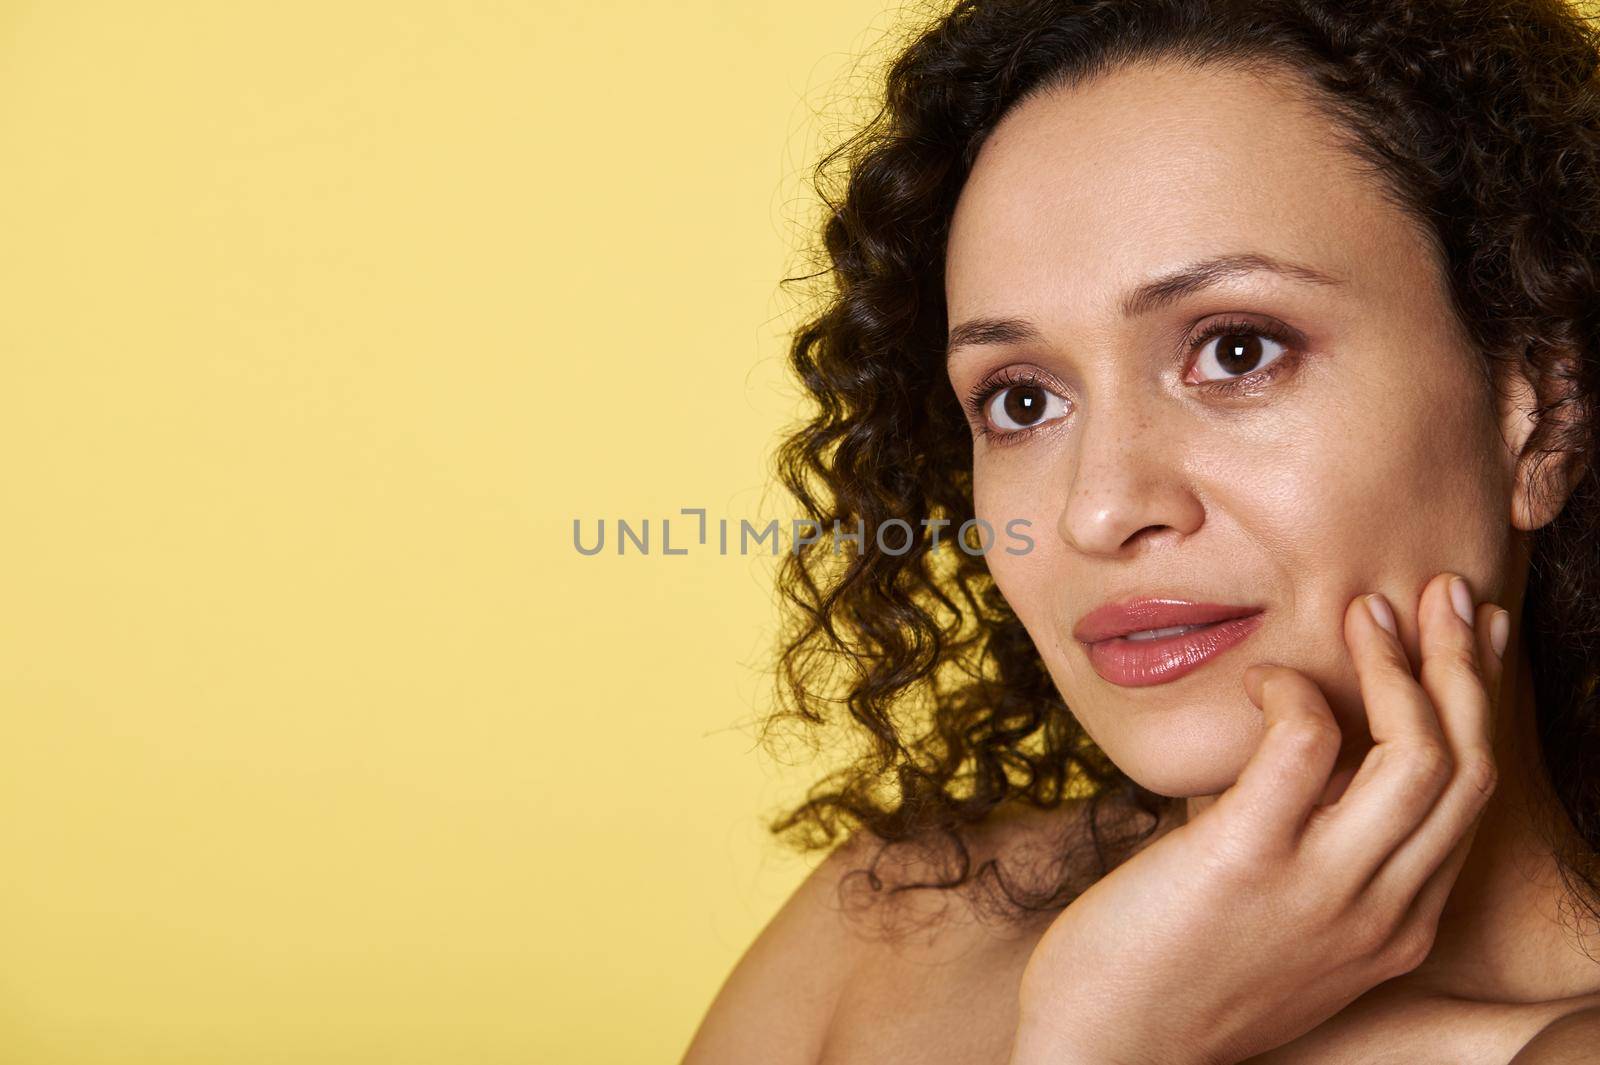 Pretty woman with curly hair looking dreamily away isolated on yellow background with copy space. Closeup by artgf